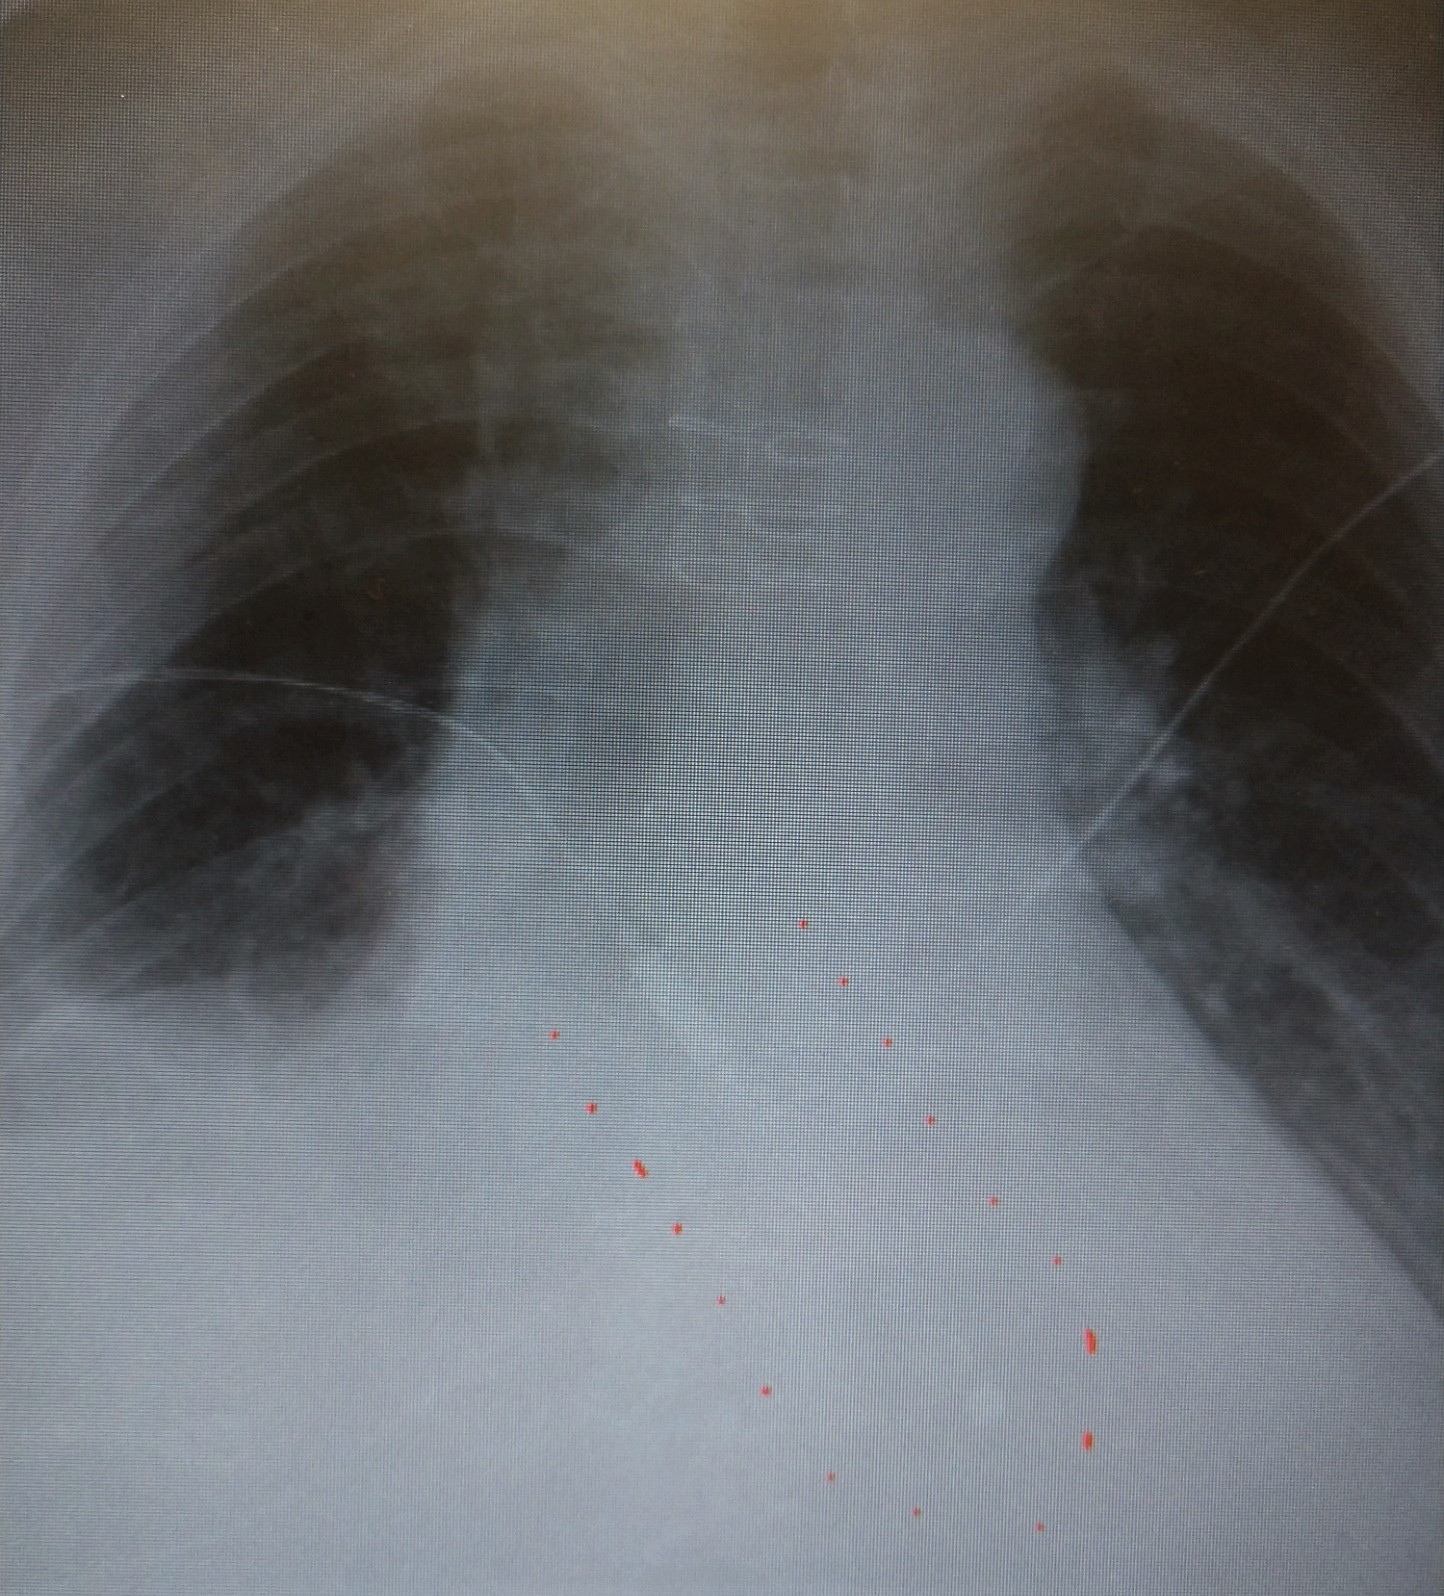 Chest x-ray showing heart pump